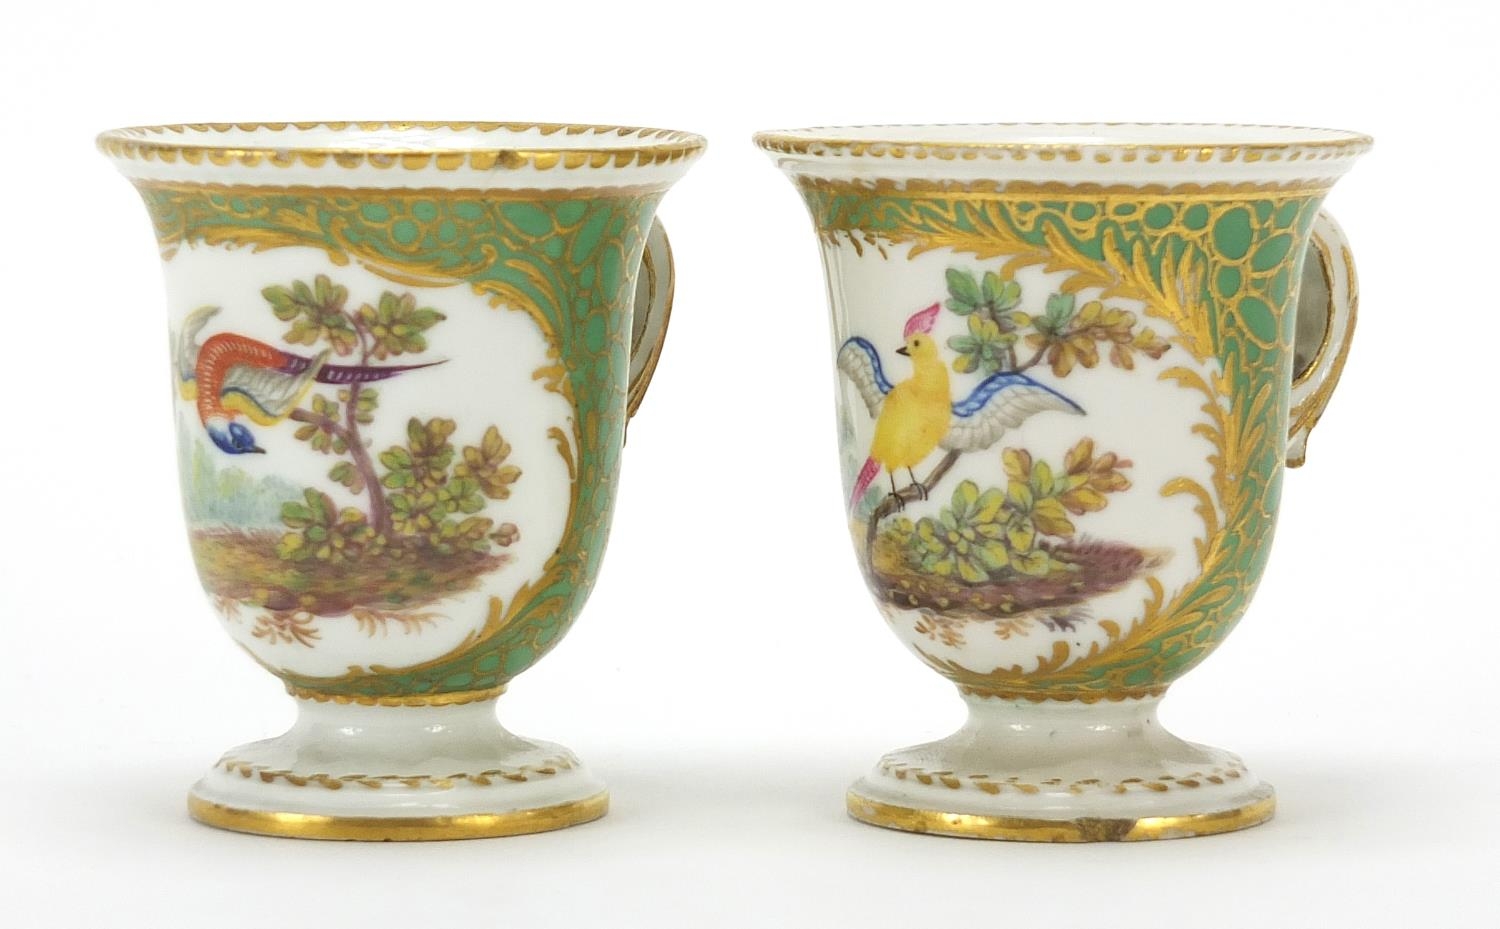 Pair of 19th century porcelain Sevres style custard cups hand painted and gilded with birds of